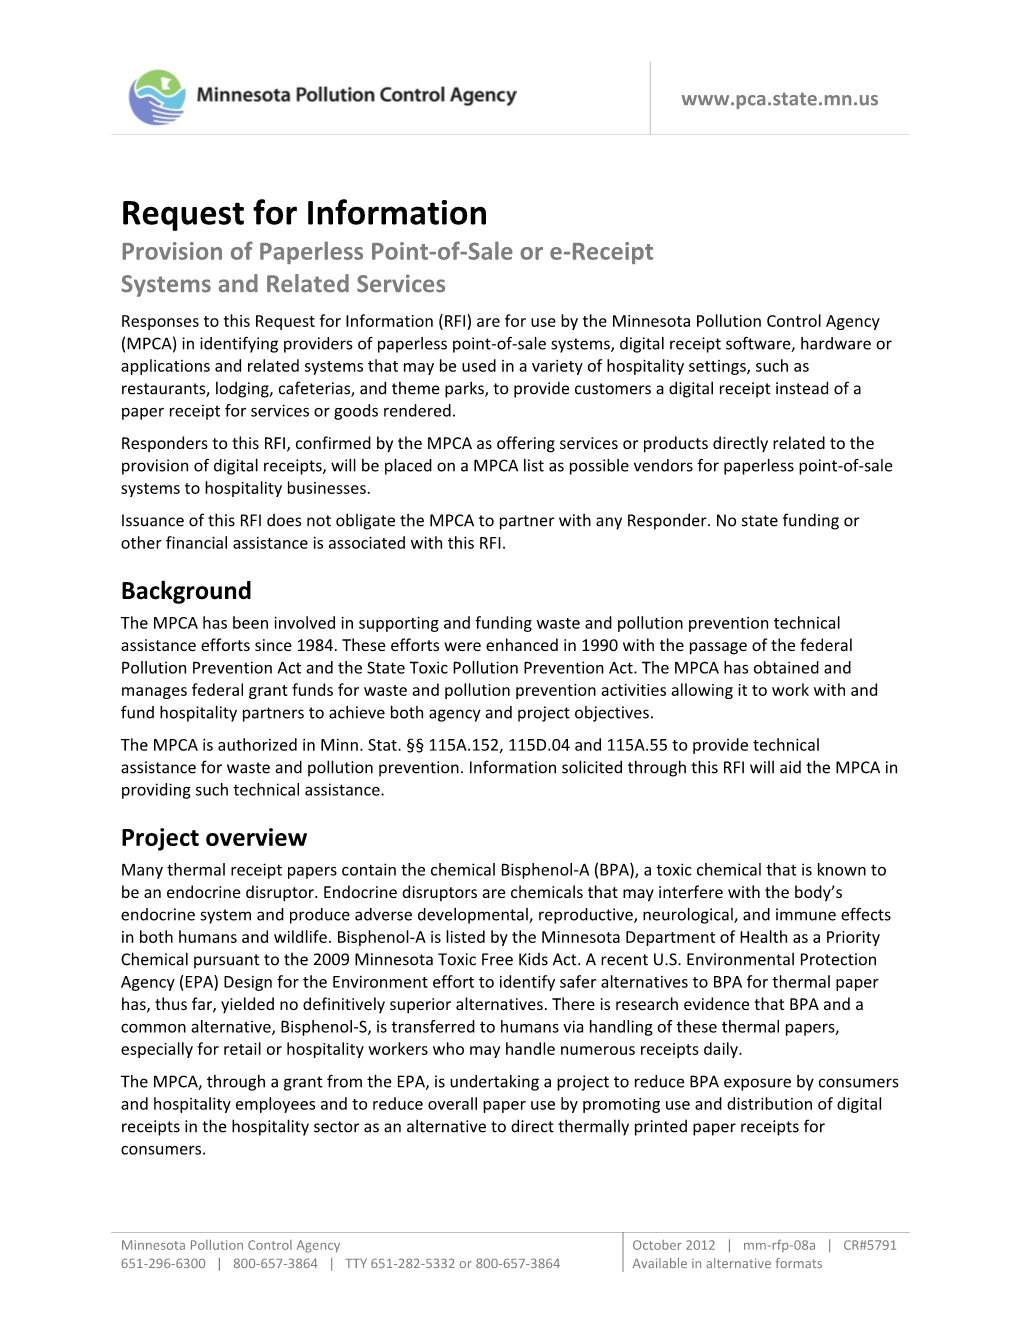 Mm-Rfp1-08 Request for Information CR#5791